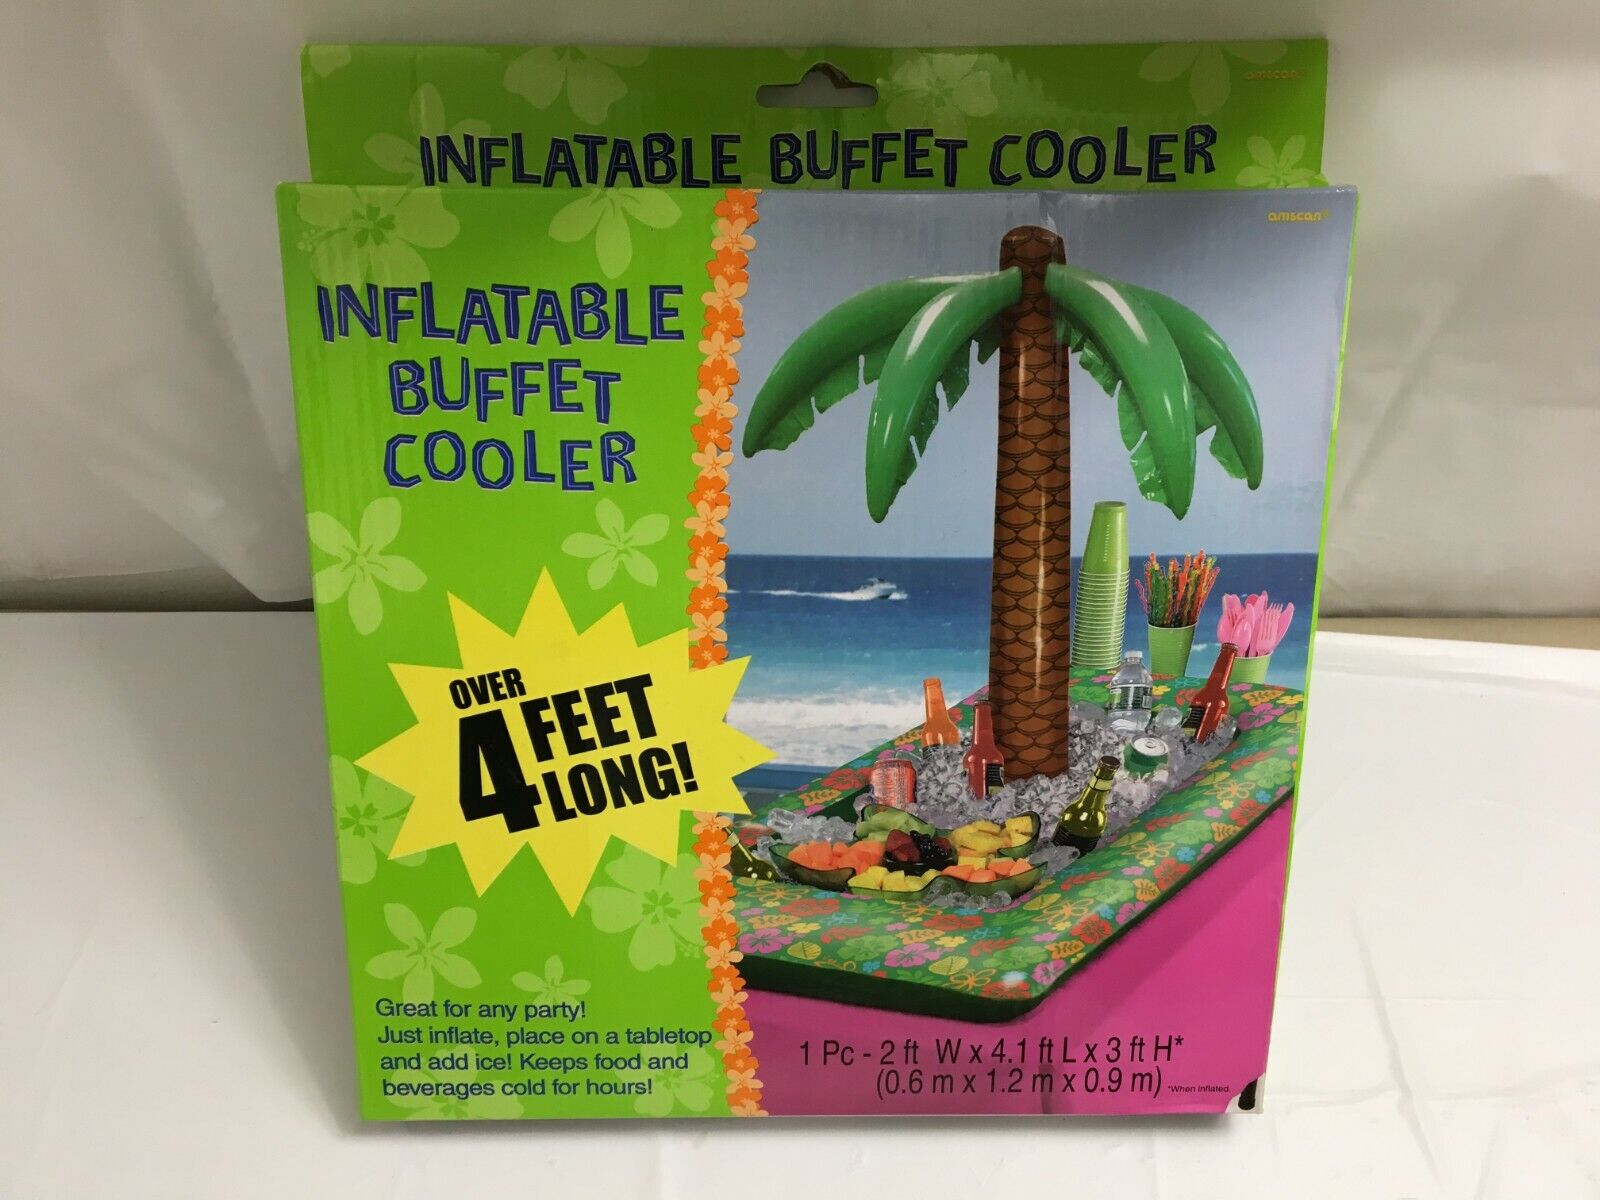 INFLATABLE BUFFET COOLER WITH PALM TREE TABLE TOP 4' LONG ICE DR